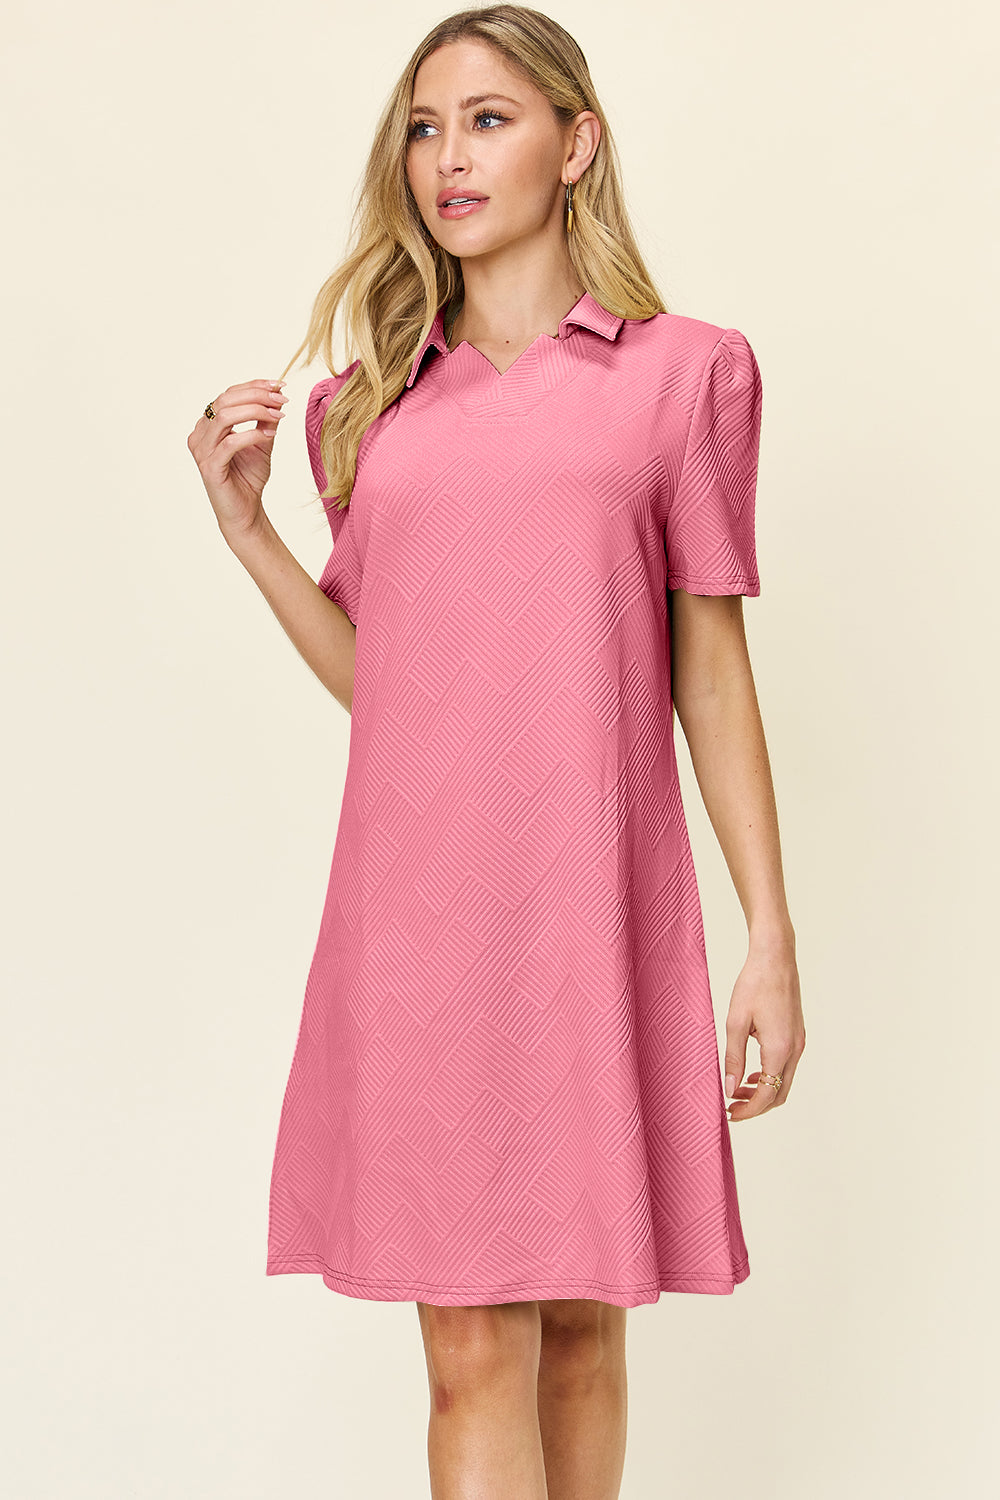 Double Take Full Size Texture Collared Neck Short Sleeve Dress Pink